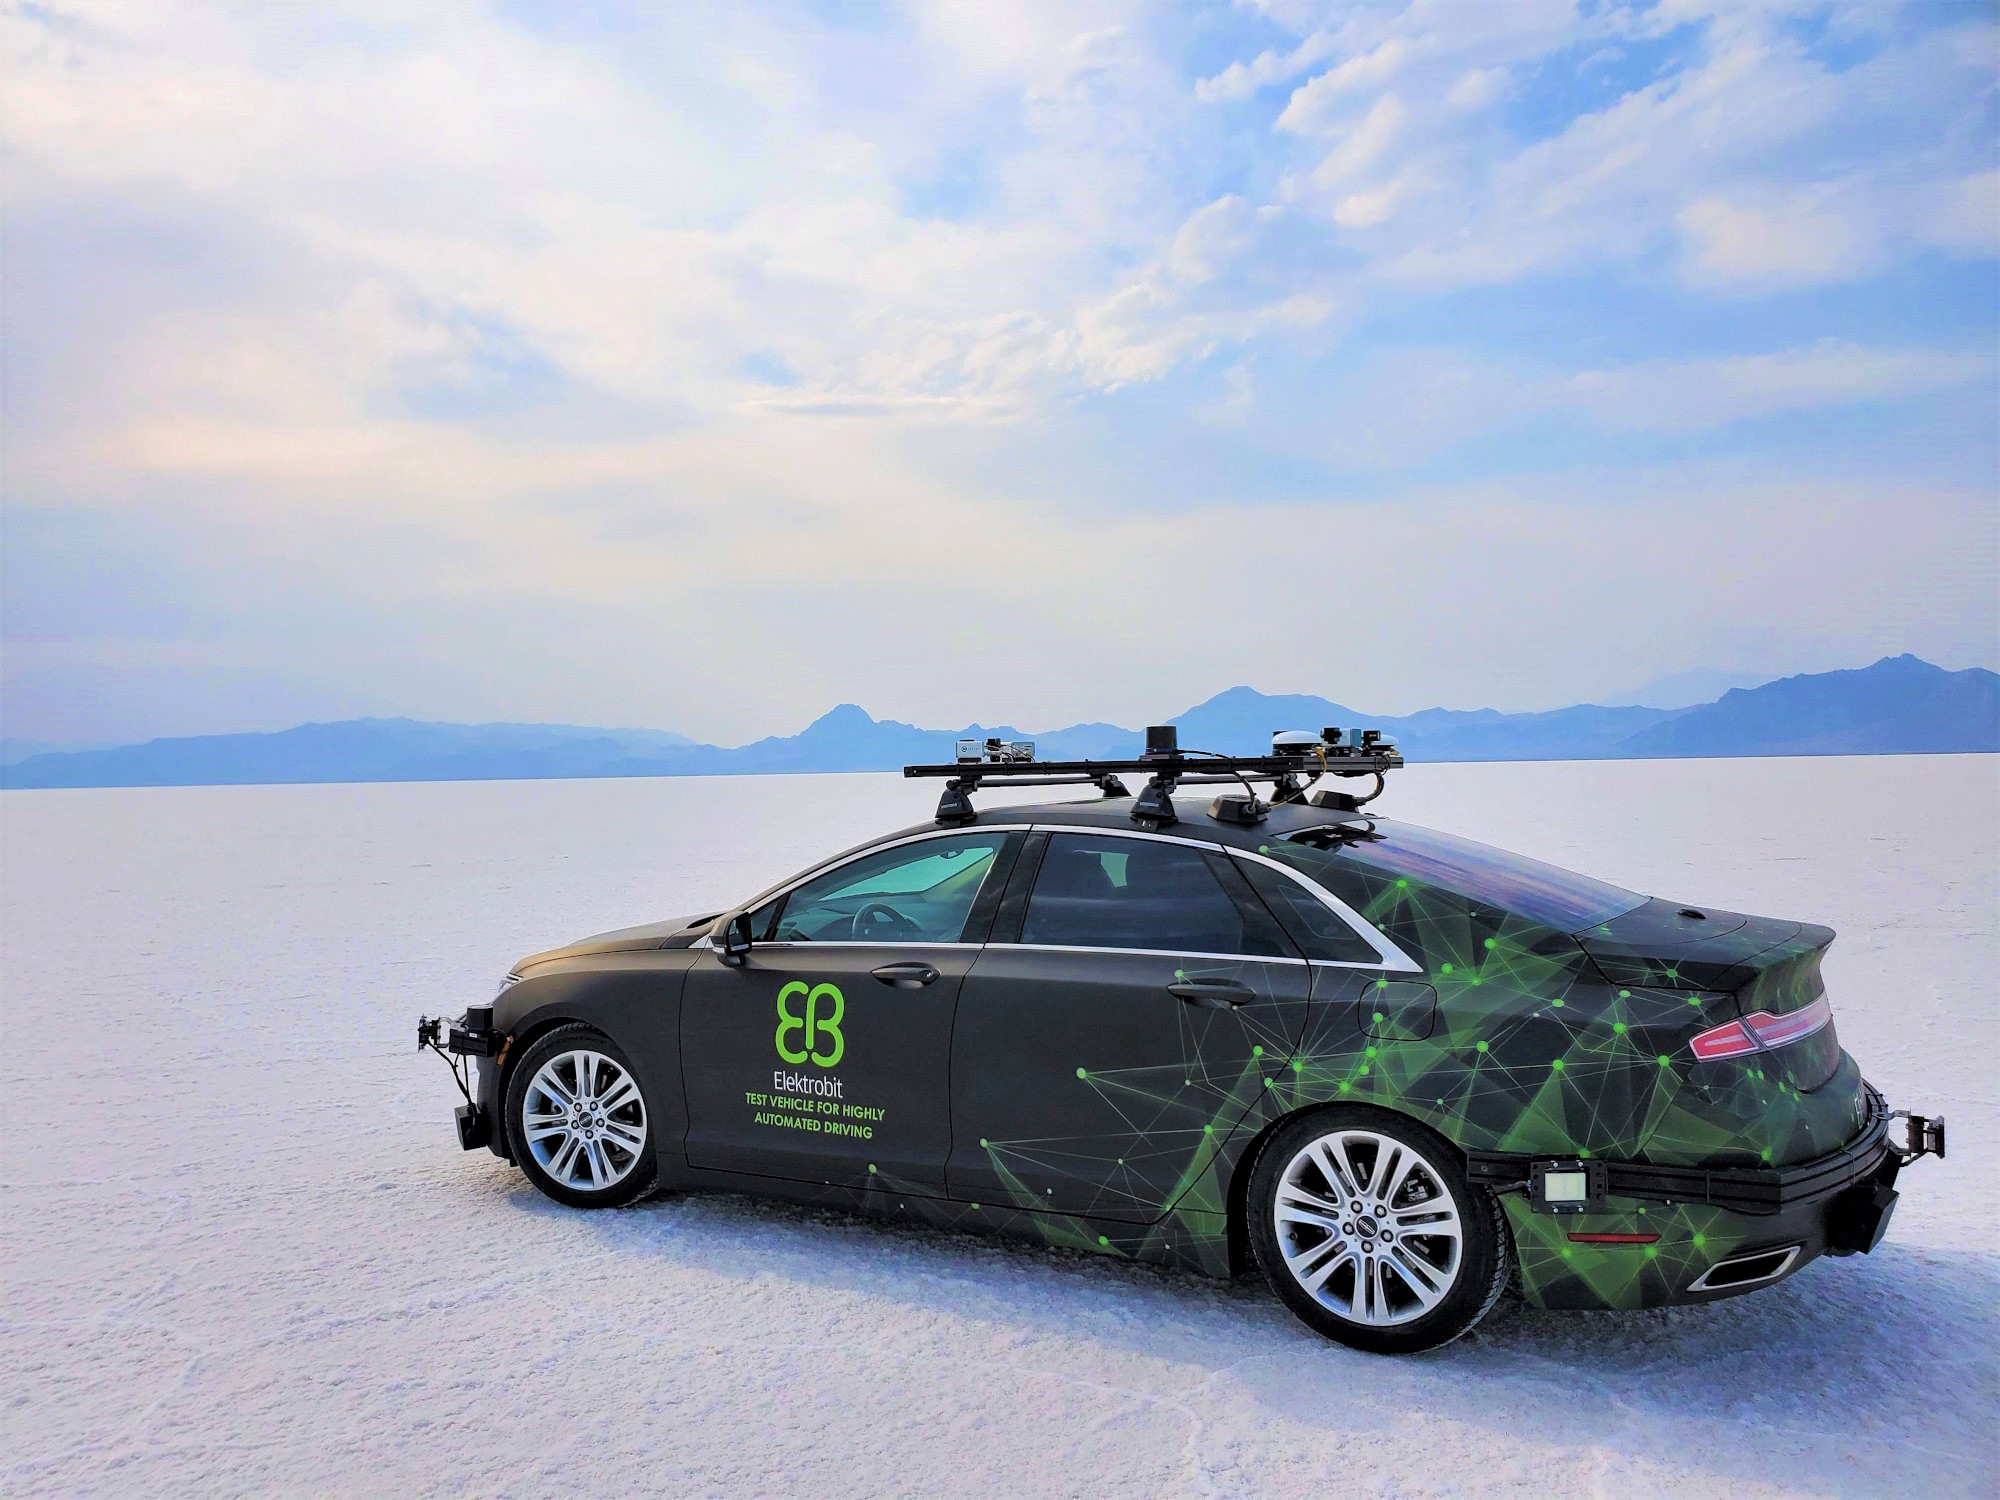 ADAS and automated driving testing vehicle at salt lake